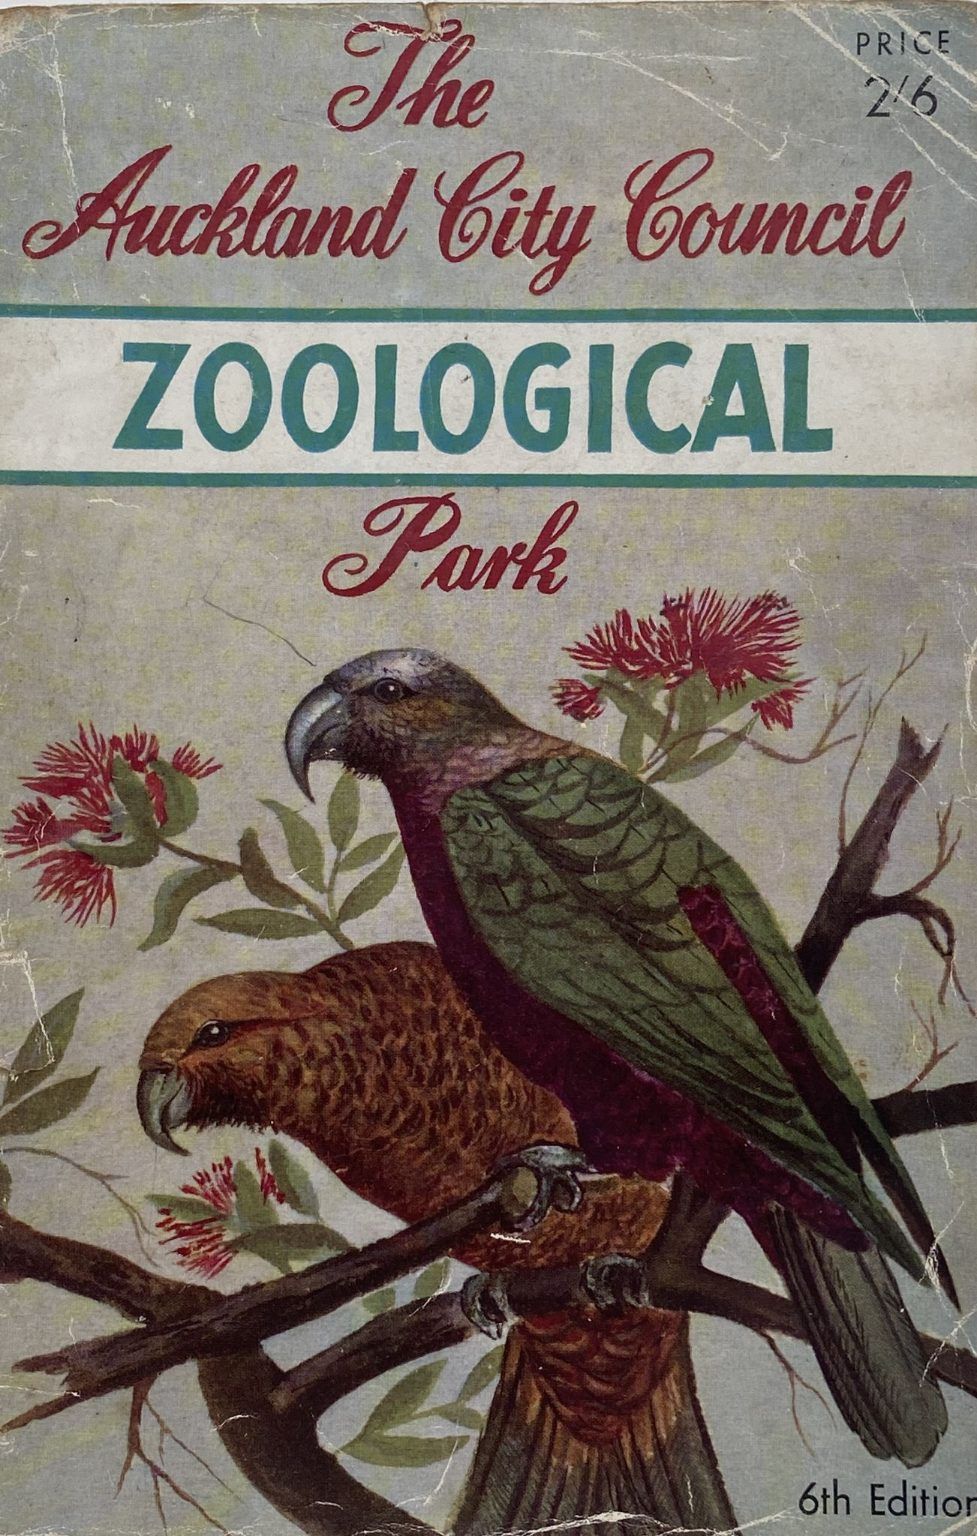 ZOOLOGICAL PARK: The Auckland City Council Official Guide 1953